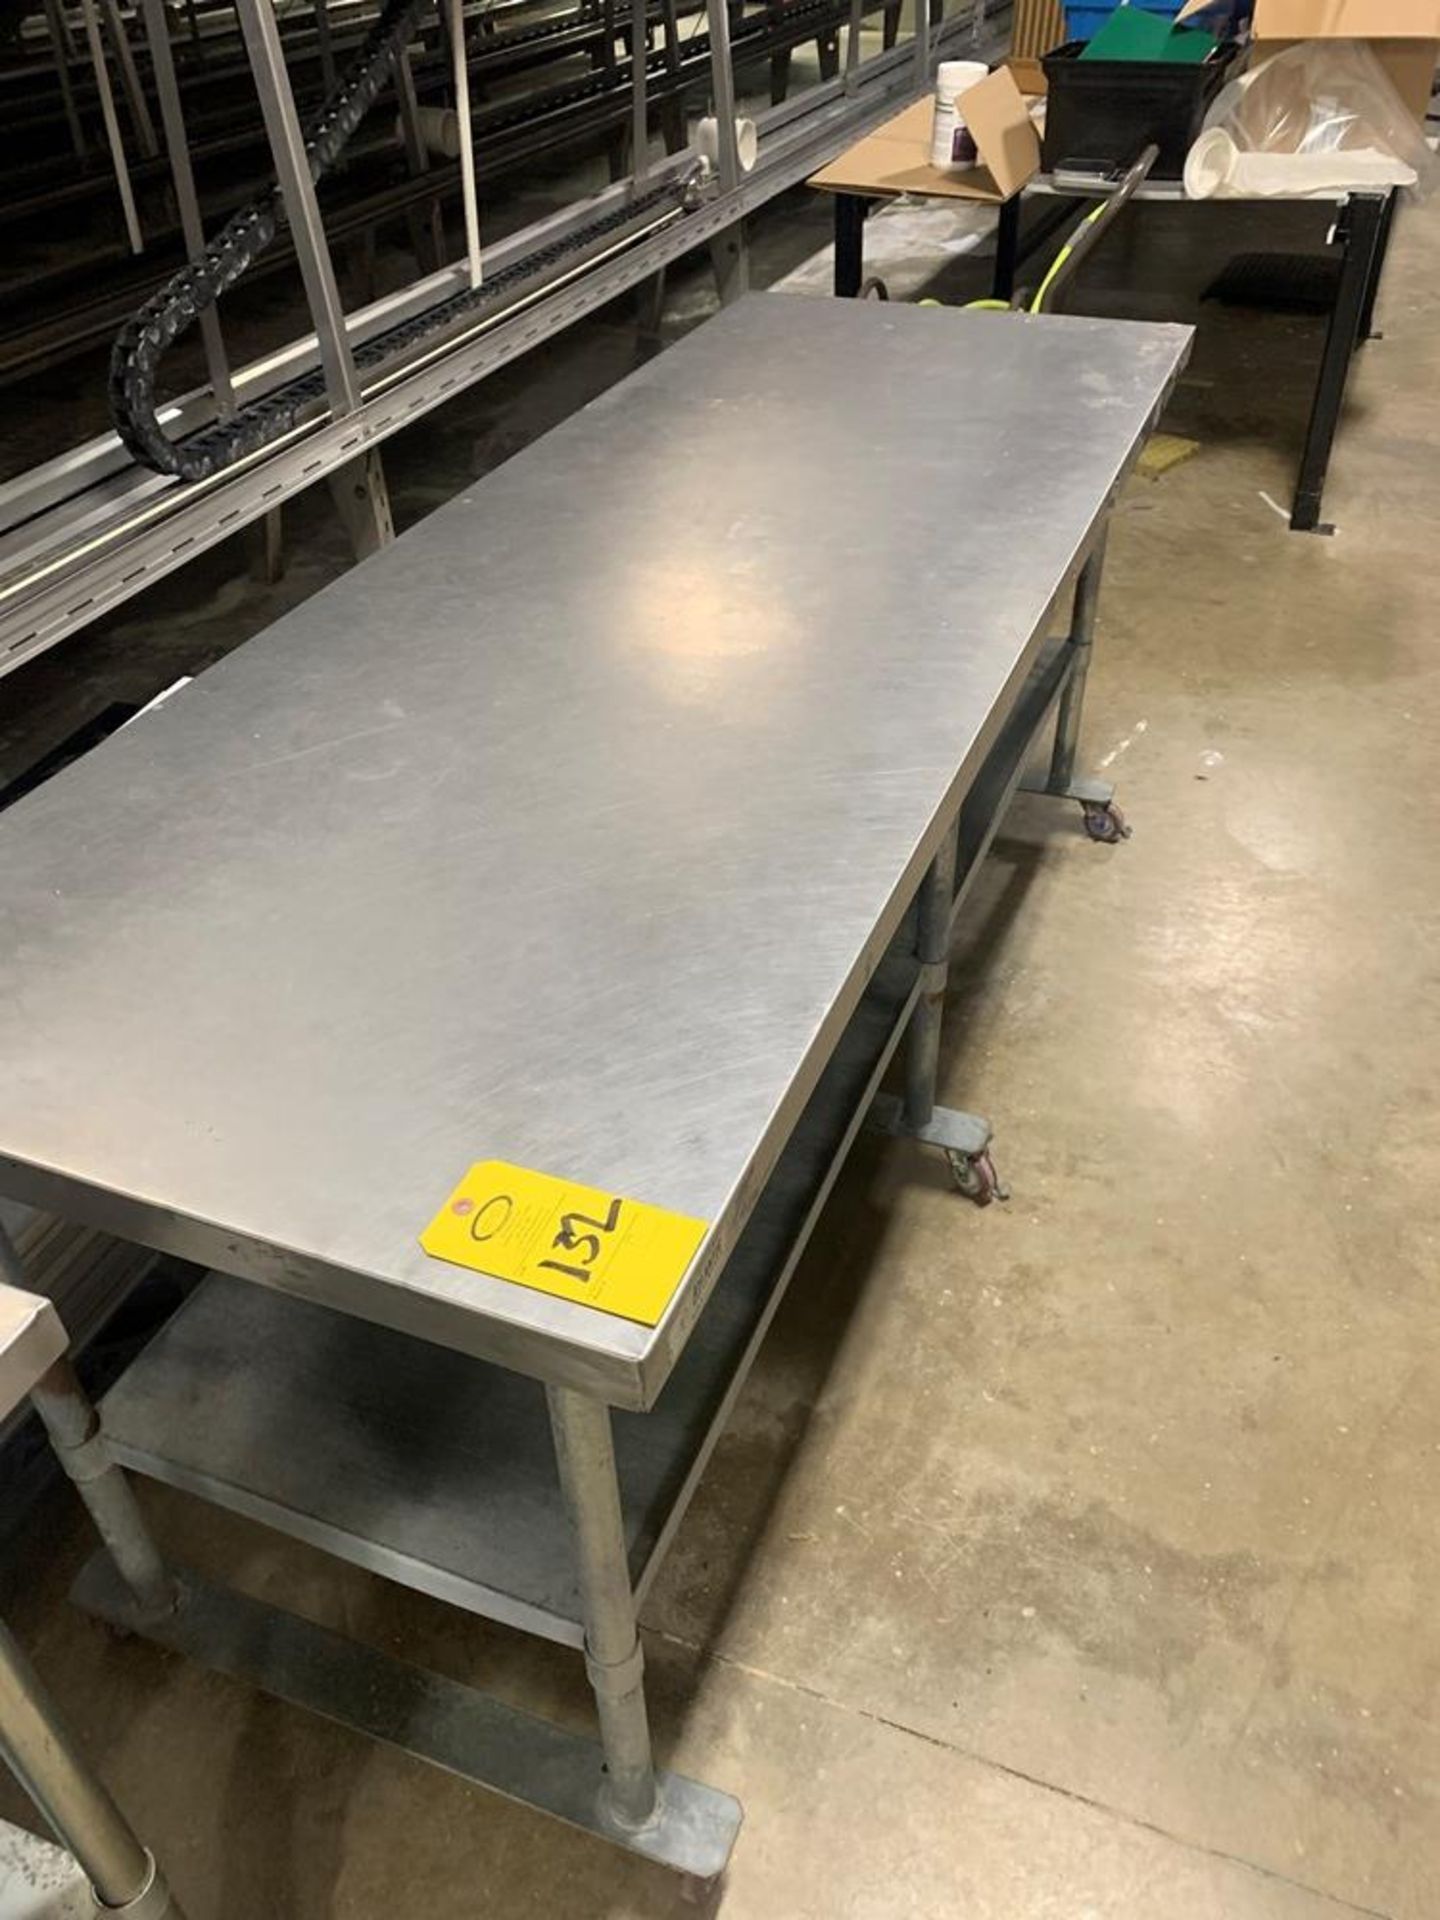 Stainless Steel Top Table, galvanized bottom shelf, 30" X 84" X 36" (Required Loading Fee: $10.00) - Image 3 of 3